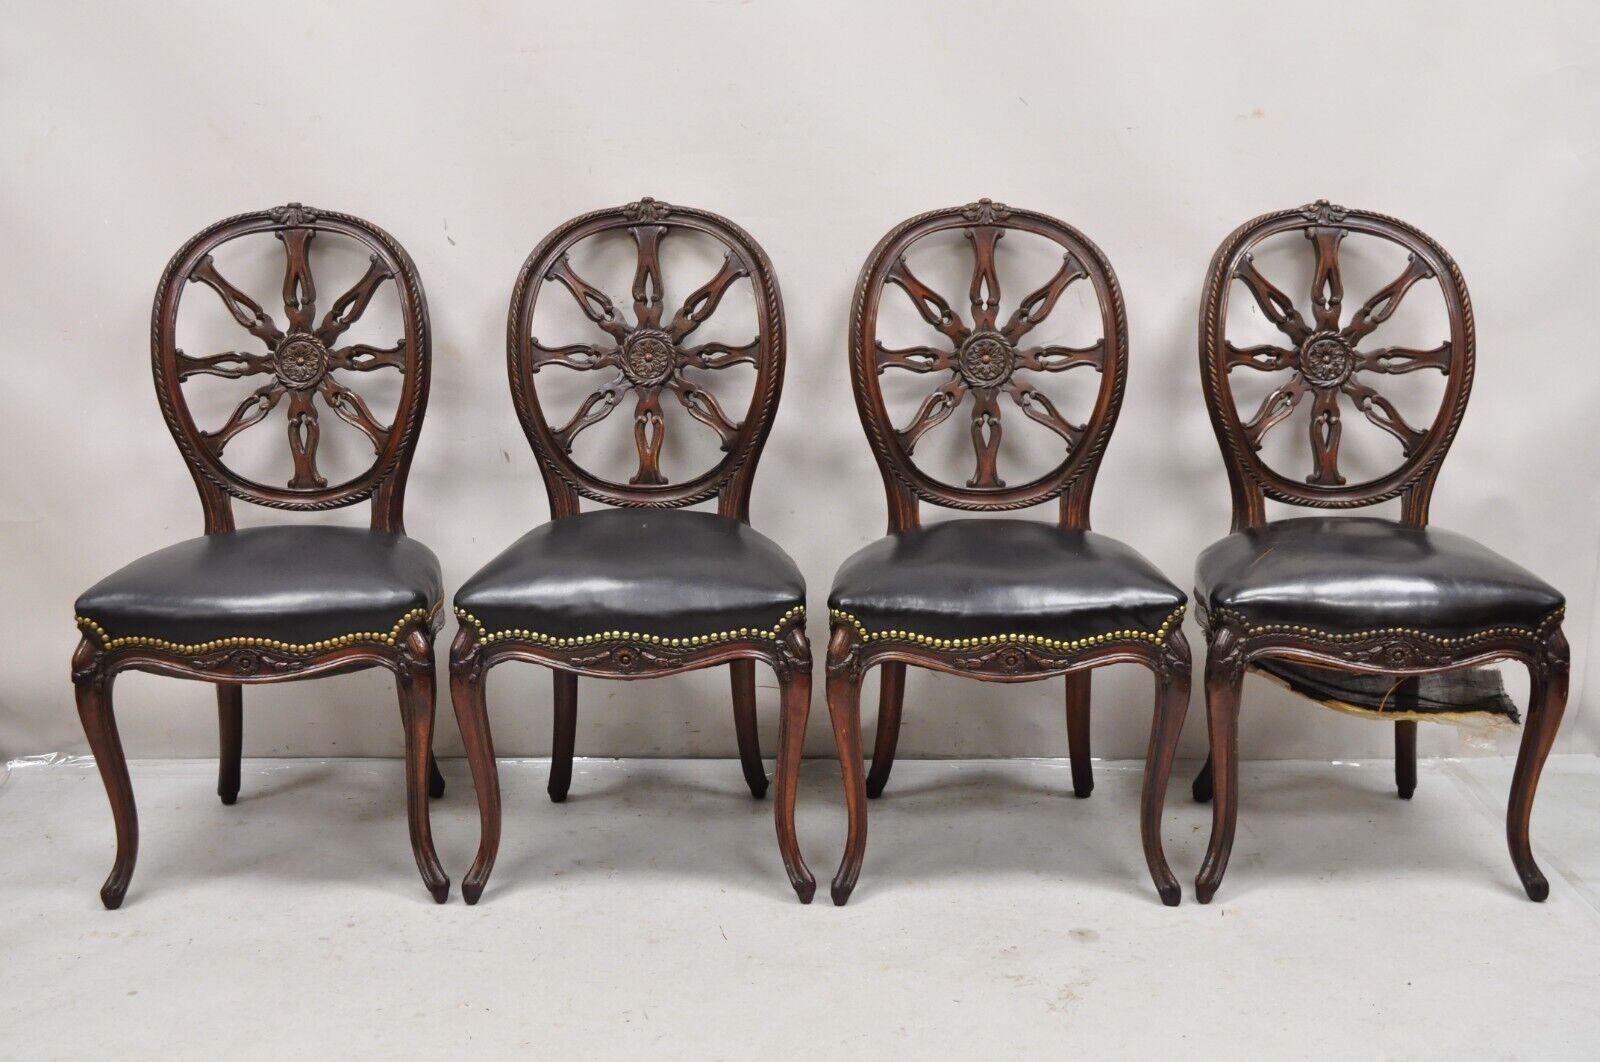 Antique Italian Neoclassical Pinwheel Carved Mahogany Dining Chairs - Set of 4 8